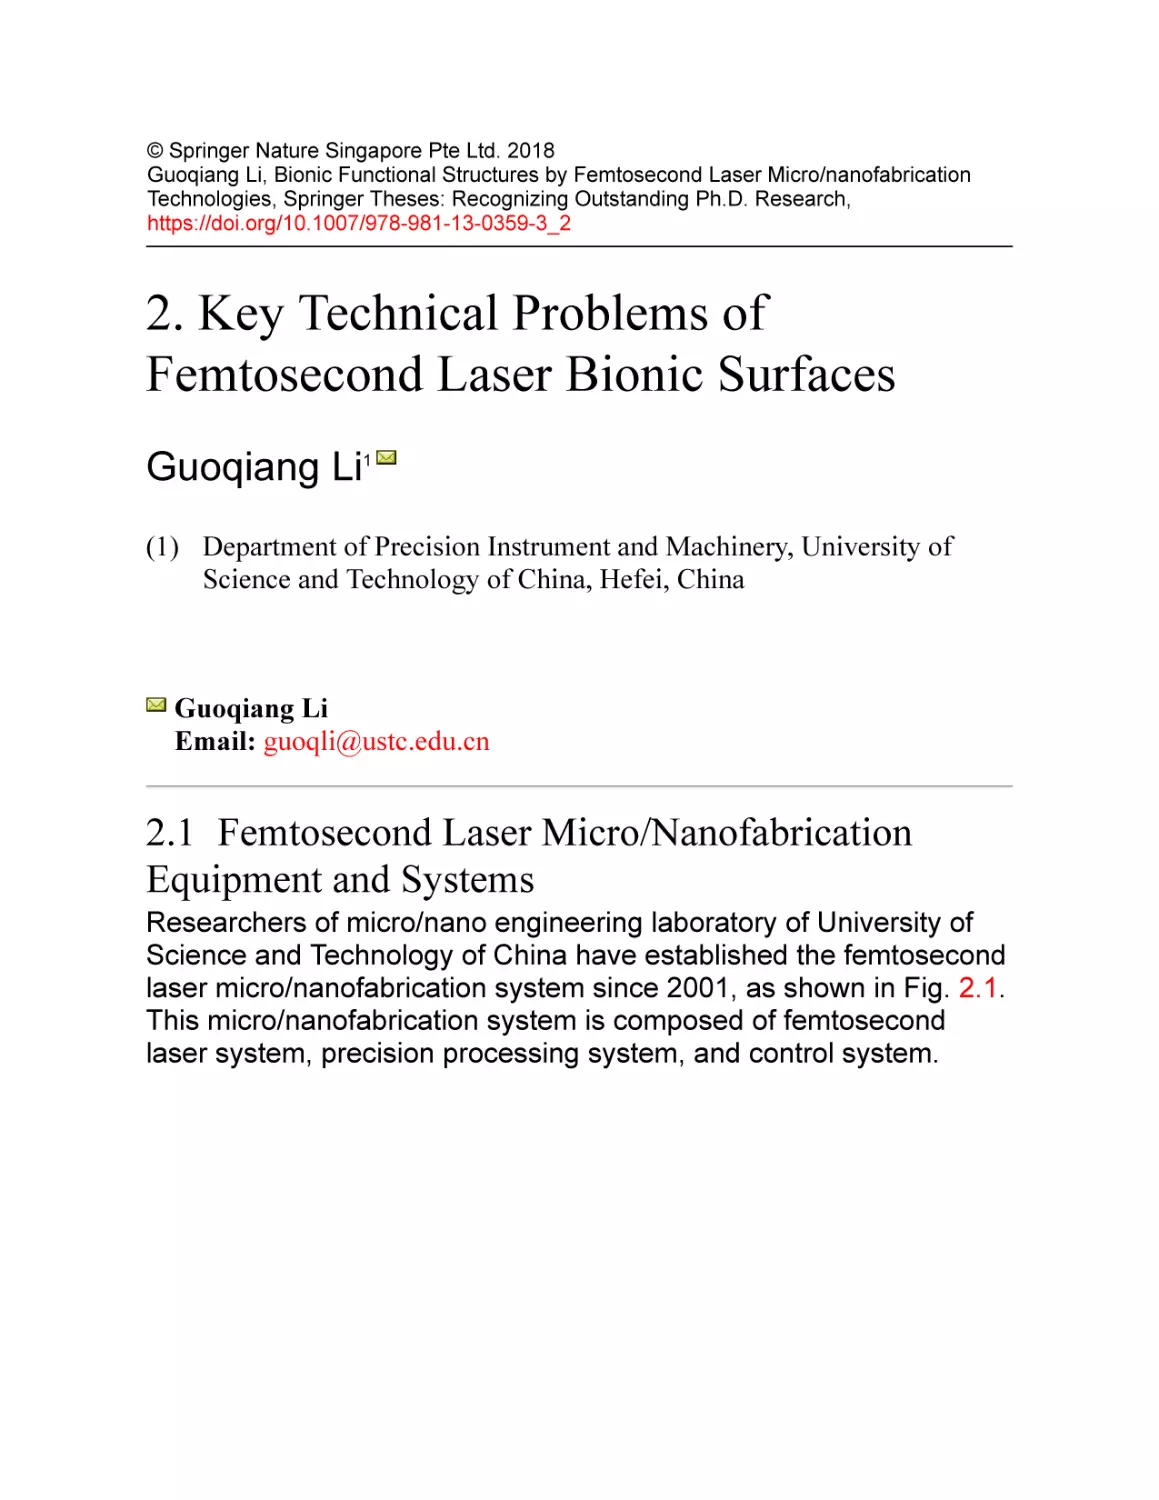 2. Key Technical Problems of Femtosecond Laser Bionic Surfaces